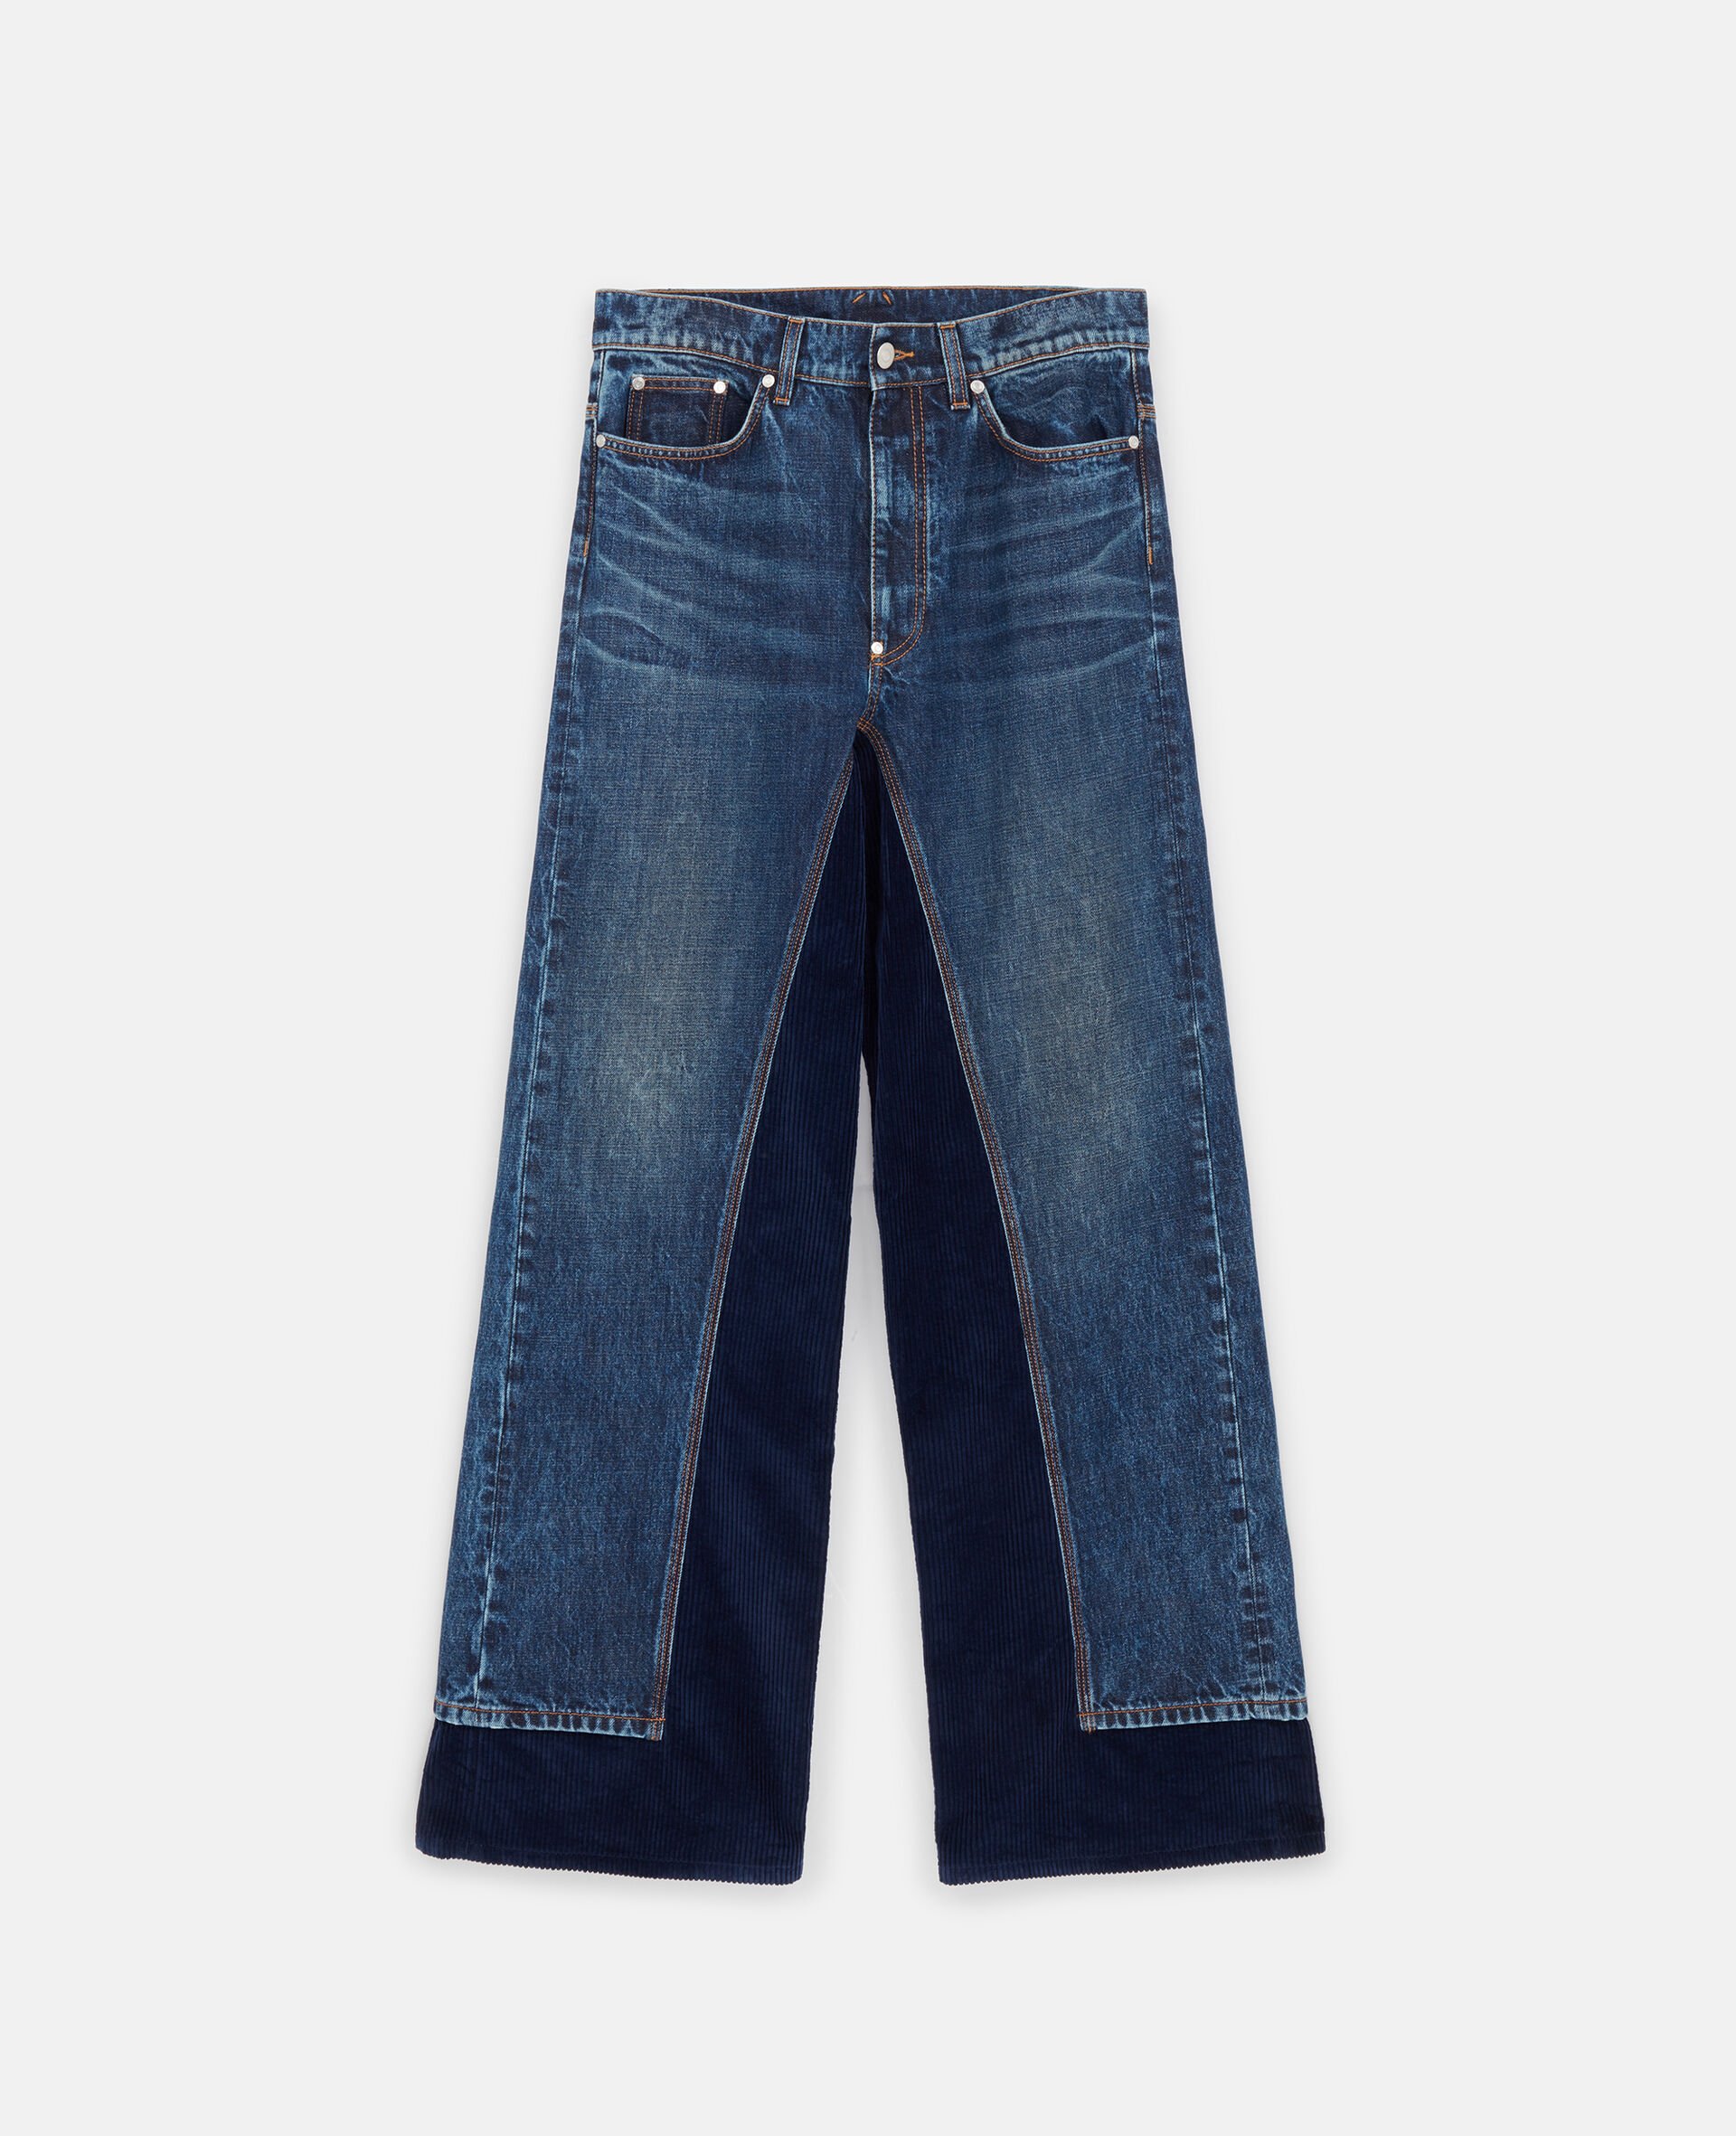 Corduroy High-Rise Straight Leg Jeans-Blue-large image number 0